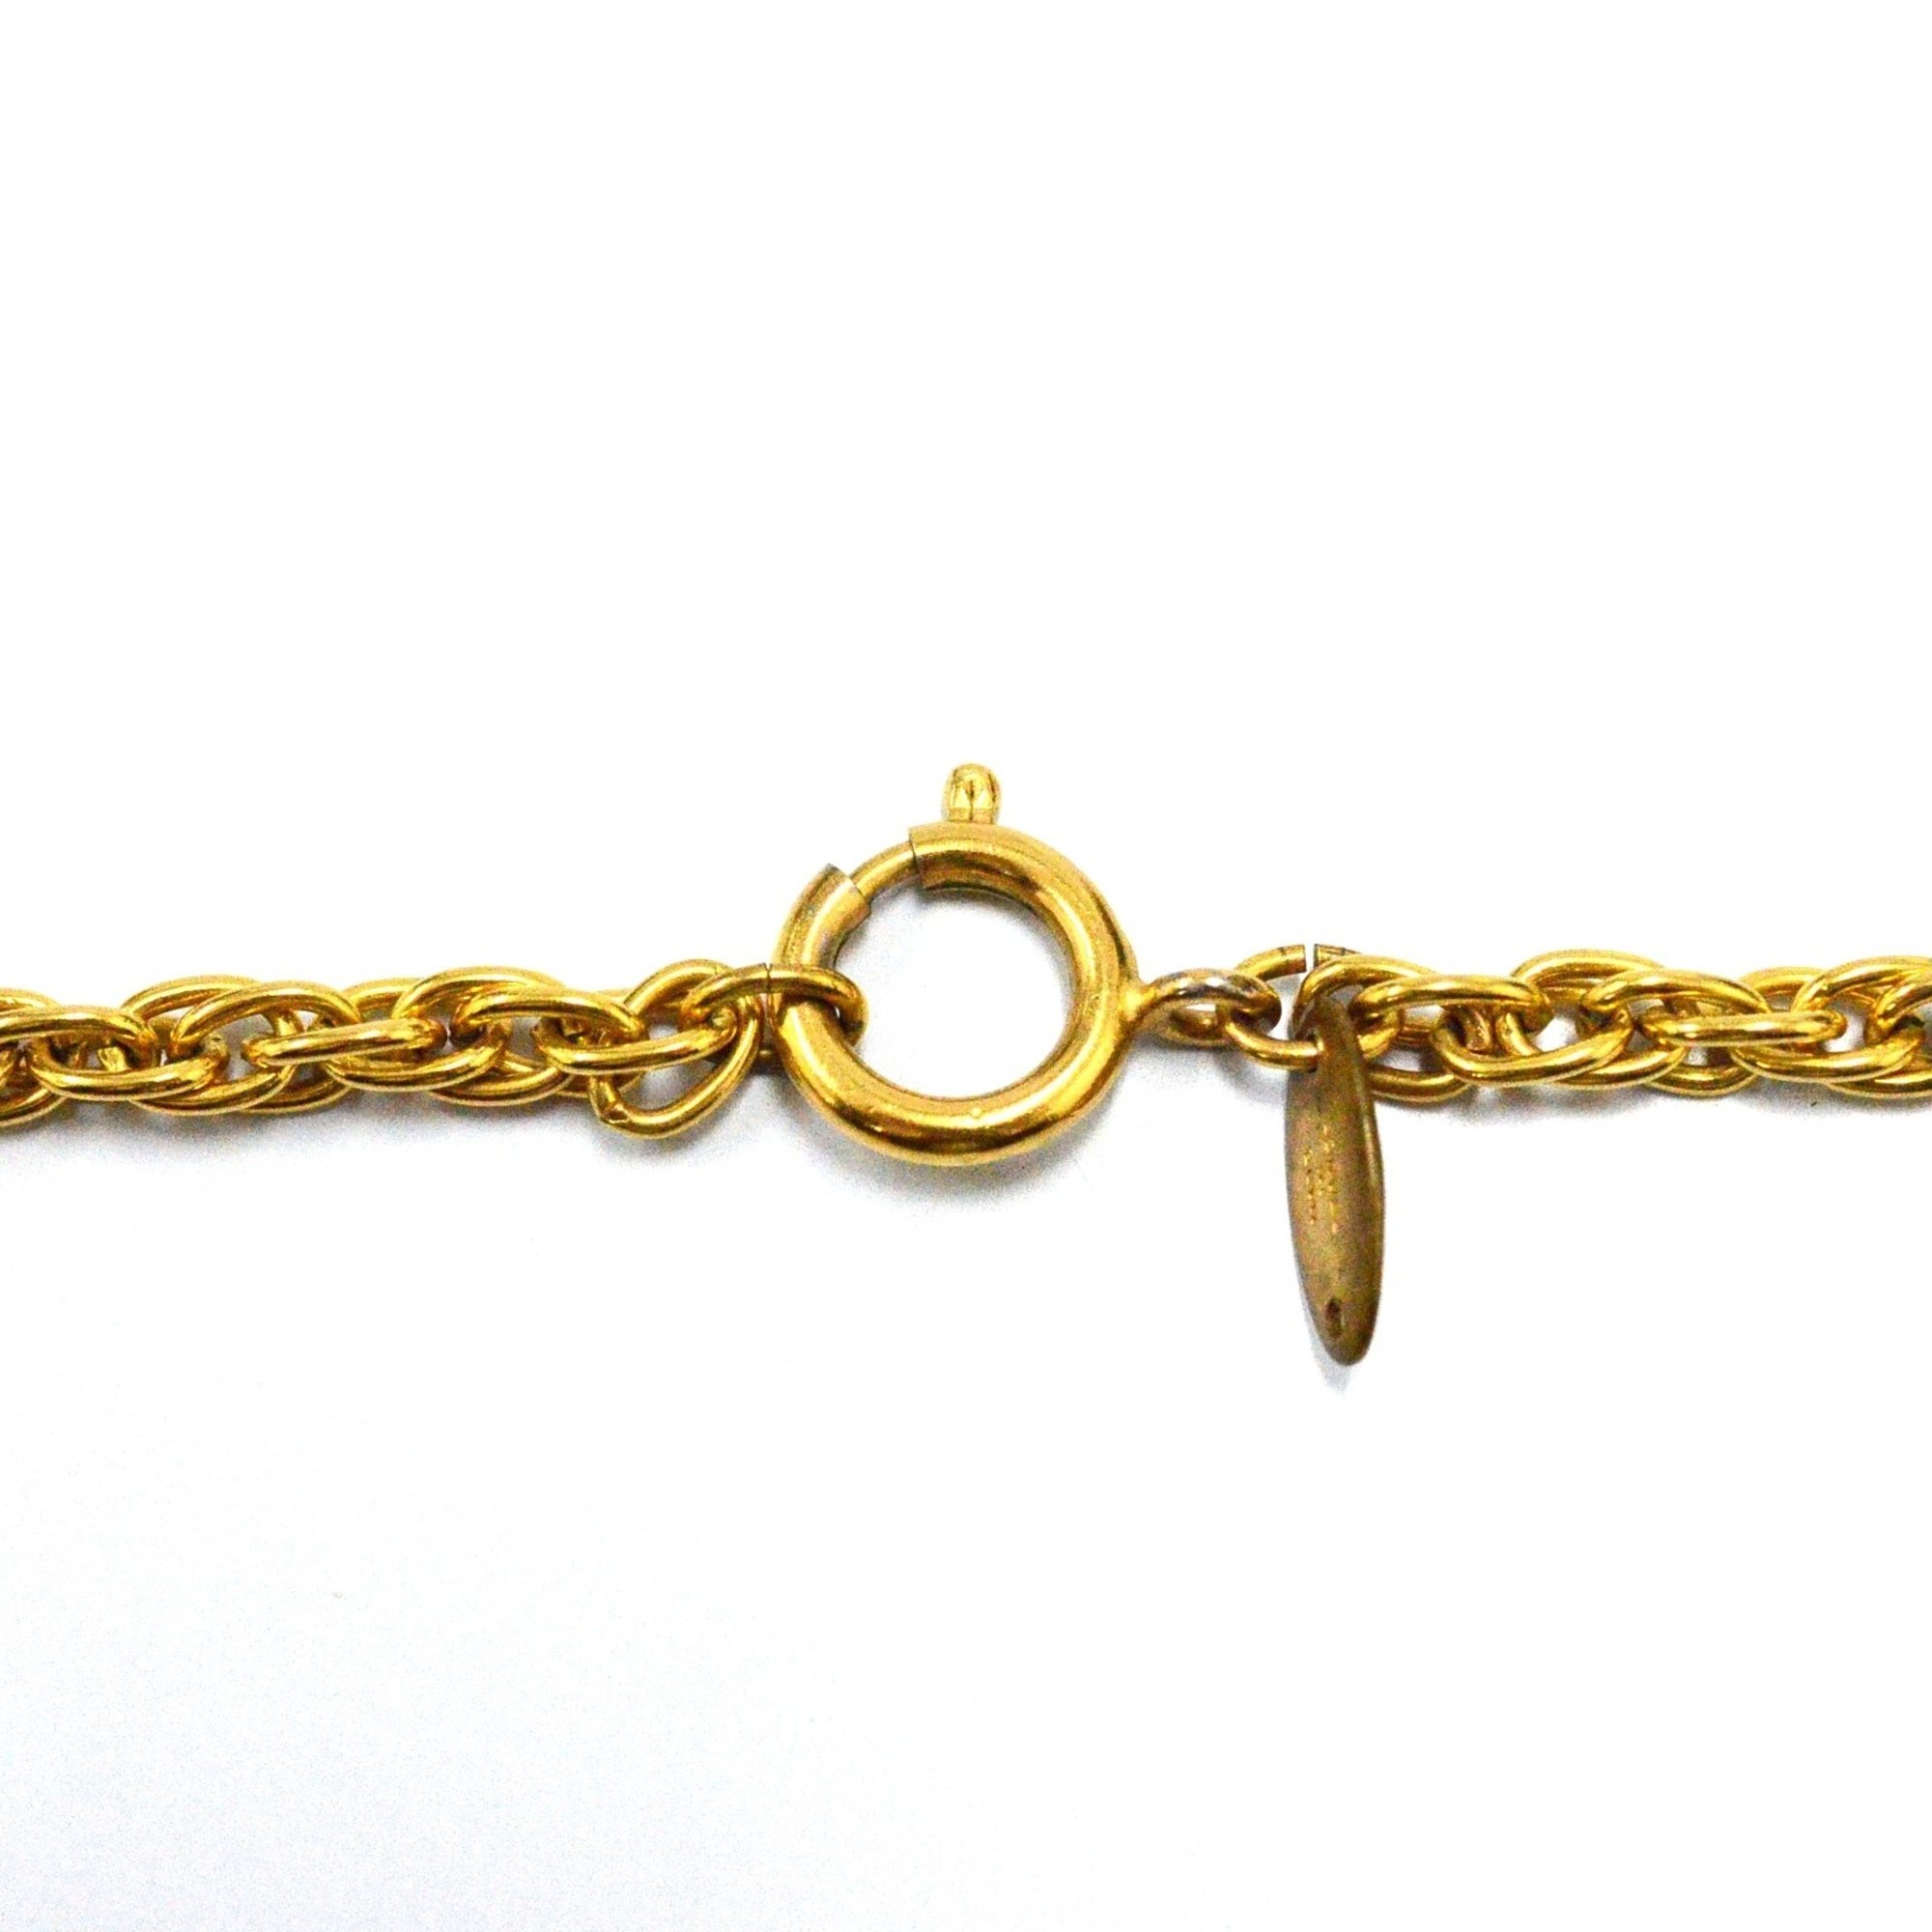 CHANEL Long Necklace 1985 Coco Mark Old Gold Plated JA-19097